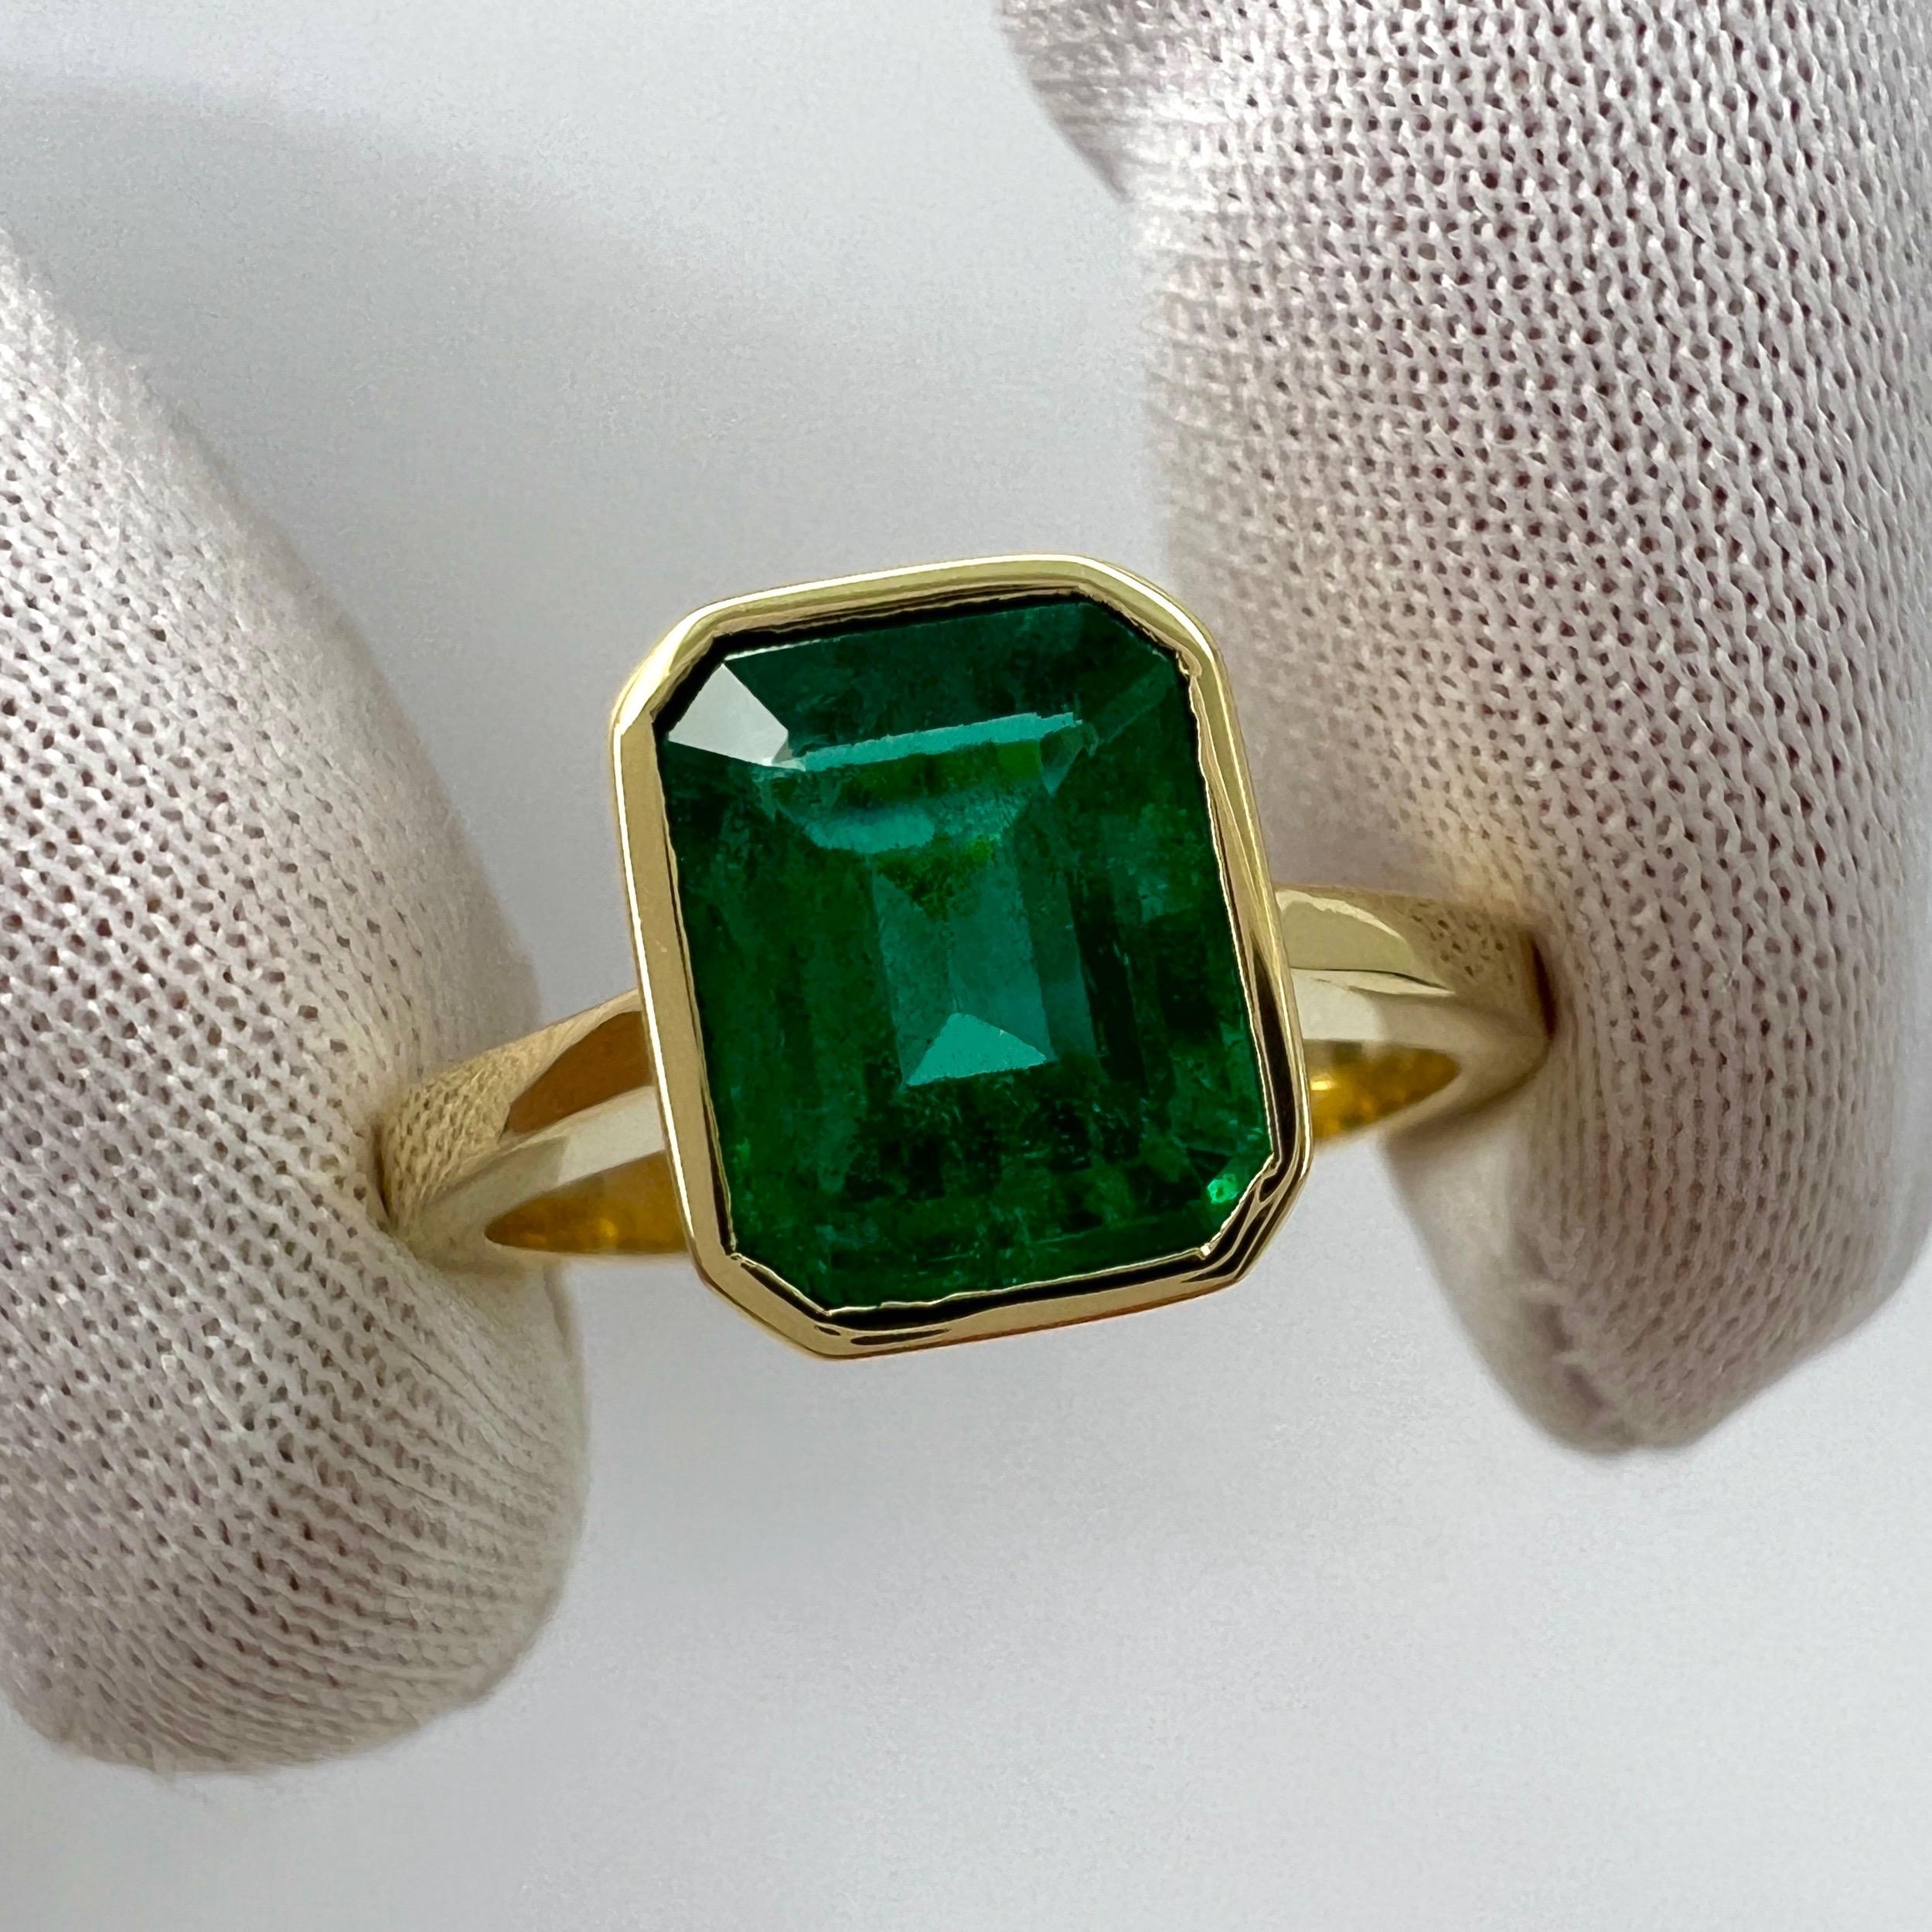 IGI Certified Vivid Green Emerald 18k Yellow Gold Rubover Bezel Solitaire Band Ring

Beautiful 1.94 Carat emerald with a fine vivid green colour and very good clarity, some small natural inclusions as shown in photos but still a clean stone. No